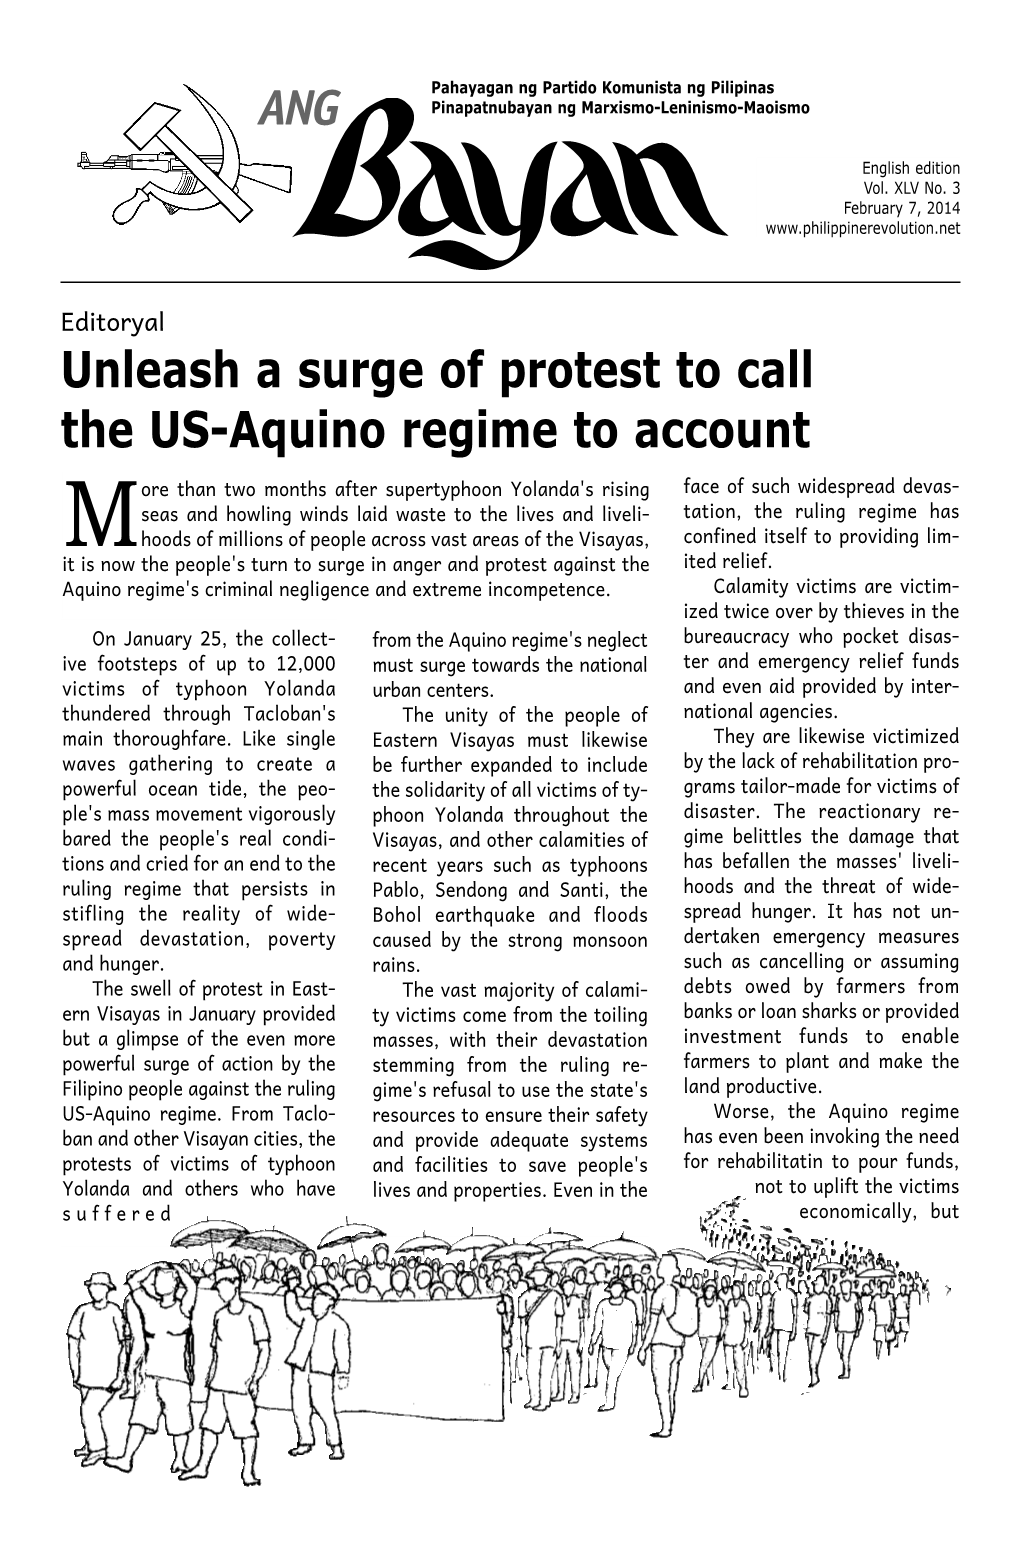 ANG Unleash a Surge of Protest to Call the US-Aquino Regime to Account